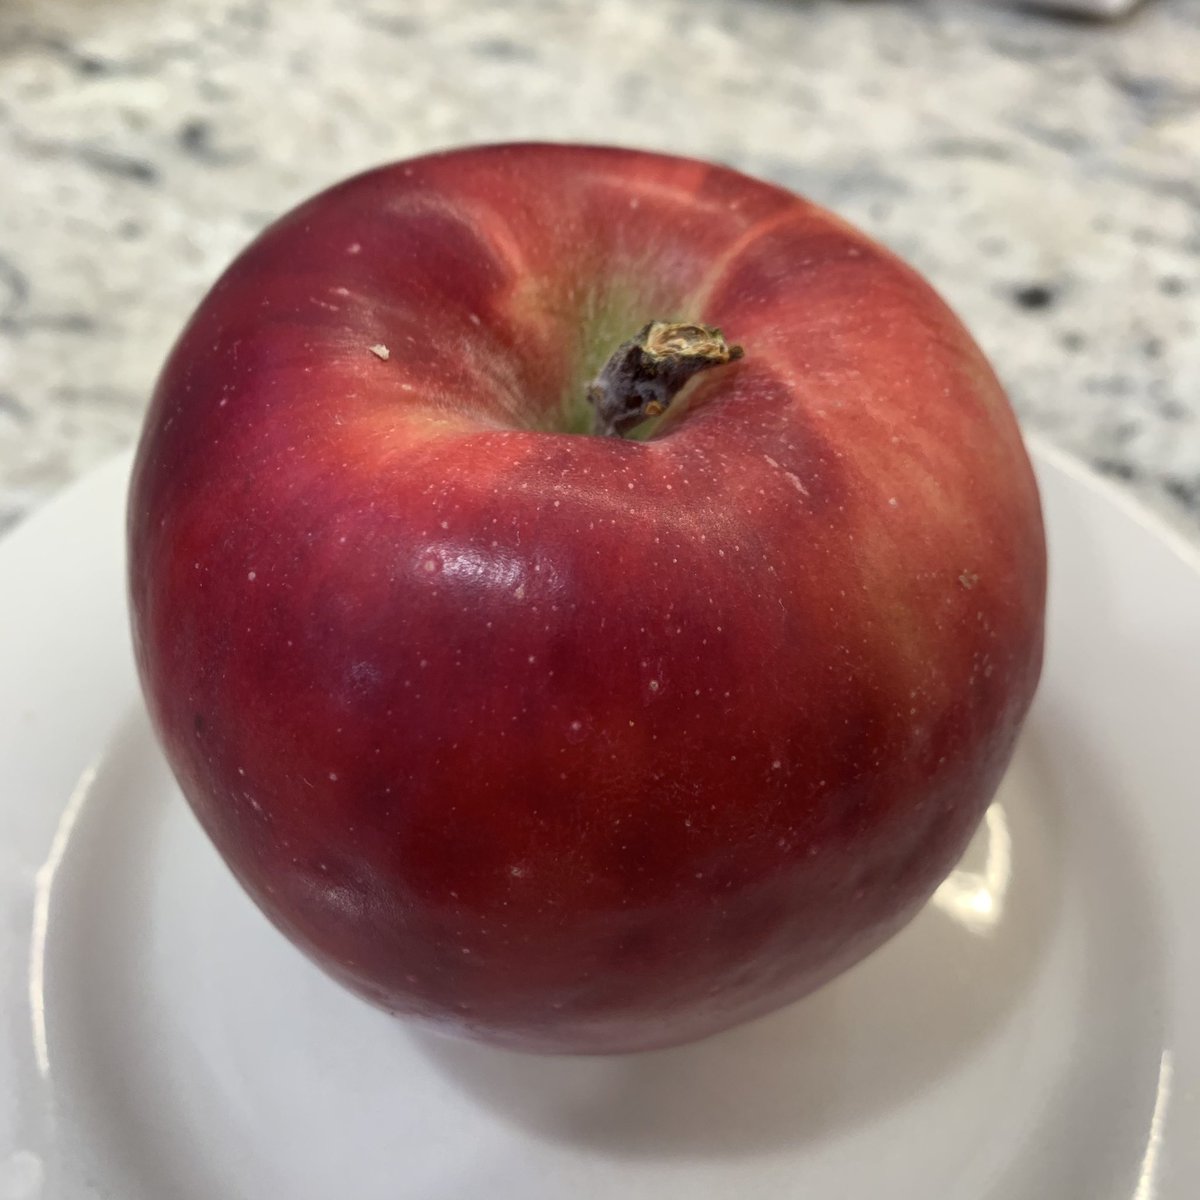 Staymared, 1930s, WA. My farmstand has detailed signage about every apple — next to this one it just says “great for applesauce!”  talk about damned with faint praise. The taste is actually nice, sweet with a brightness — but the texture sucks. Great for applesauce indeed. 3/10